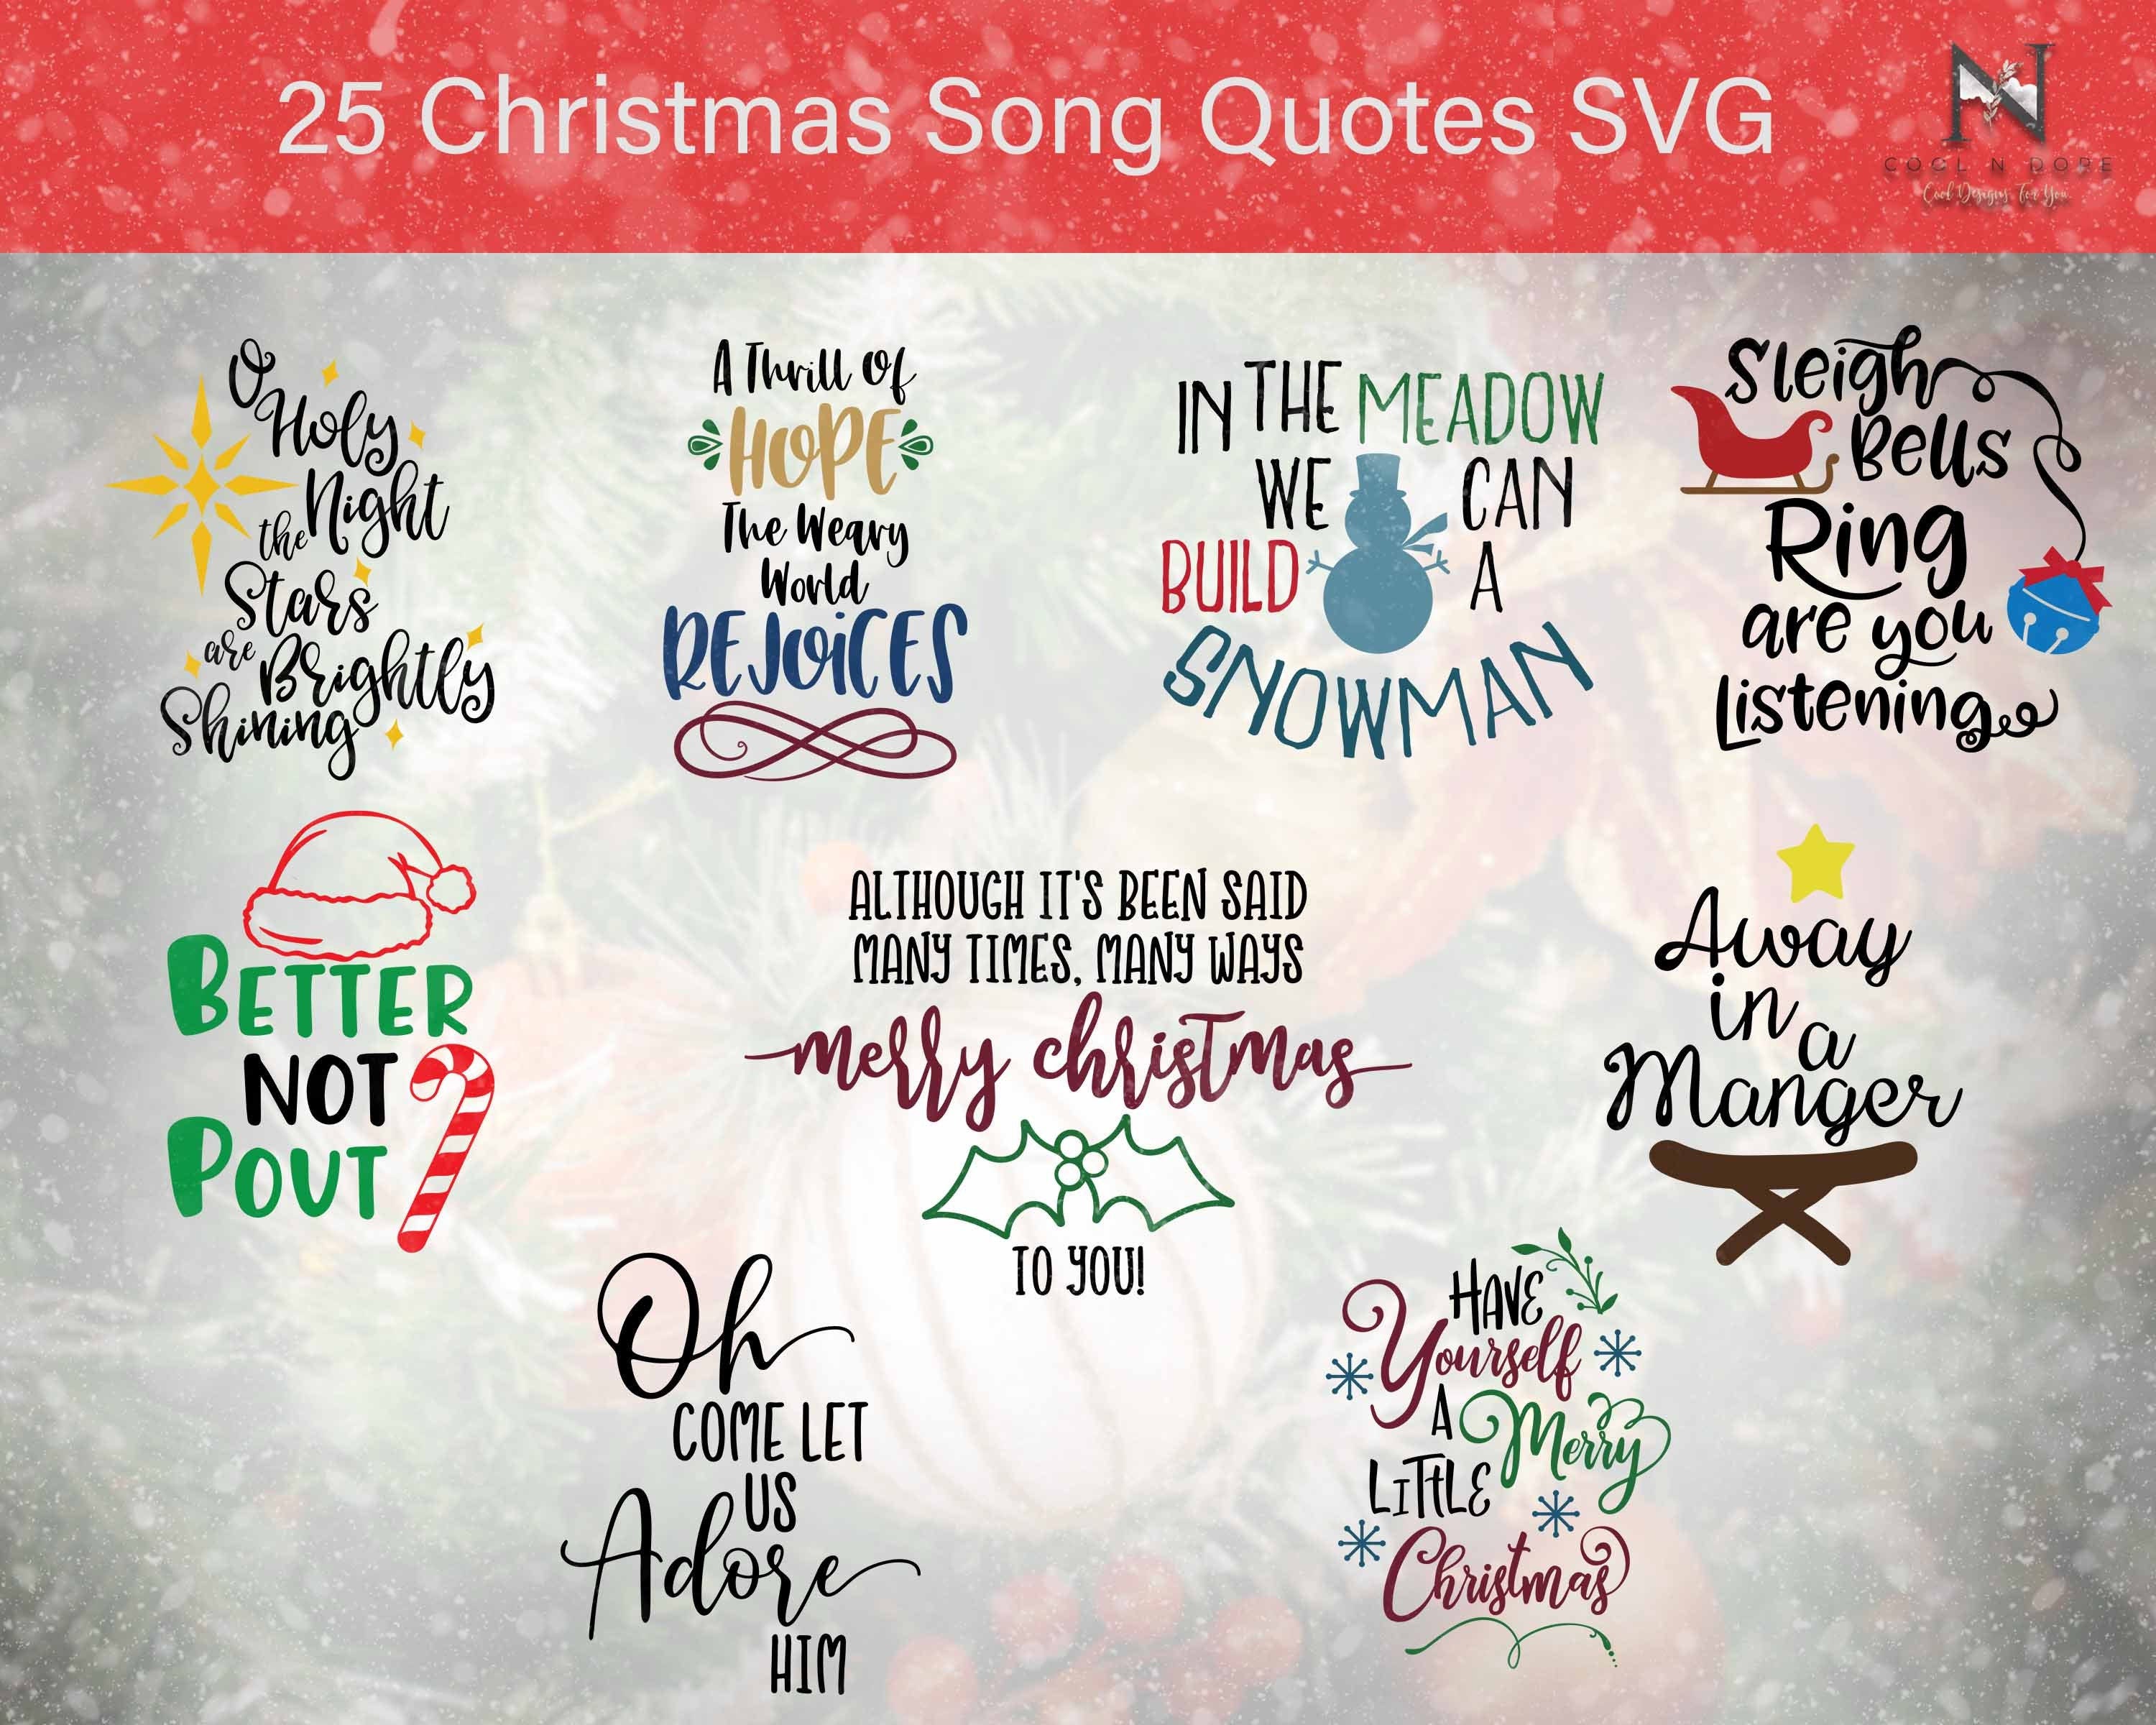 25 + SVG Instant Digital Download Christmas Quotes and Songs, For Cricut or Silhouette